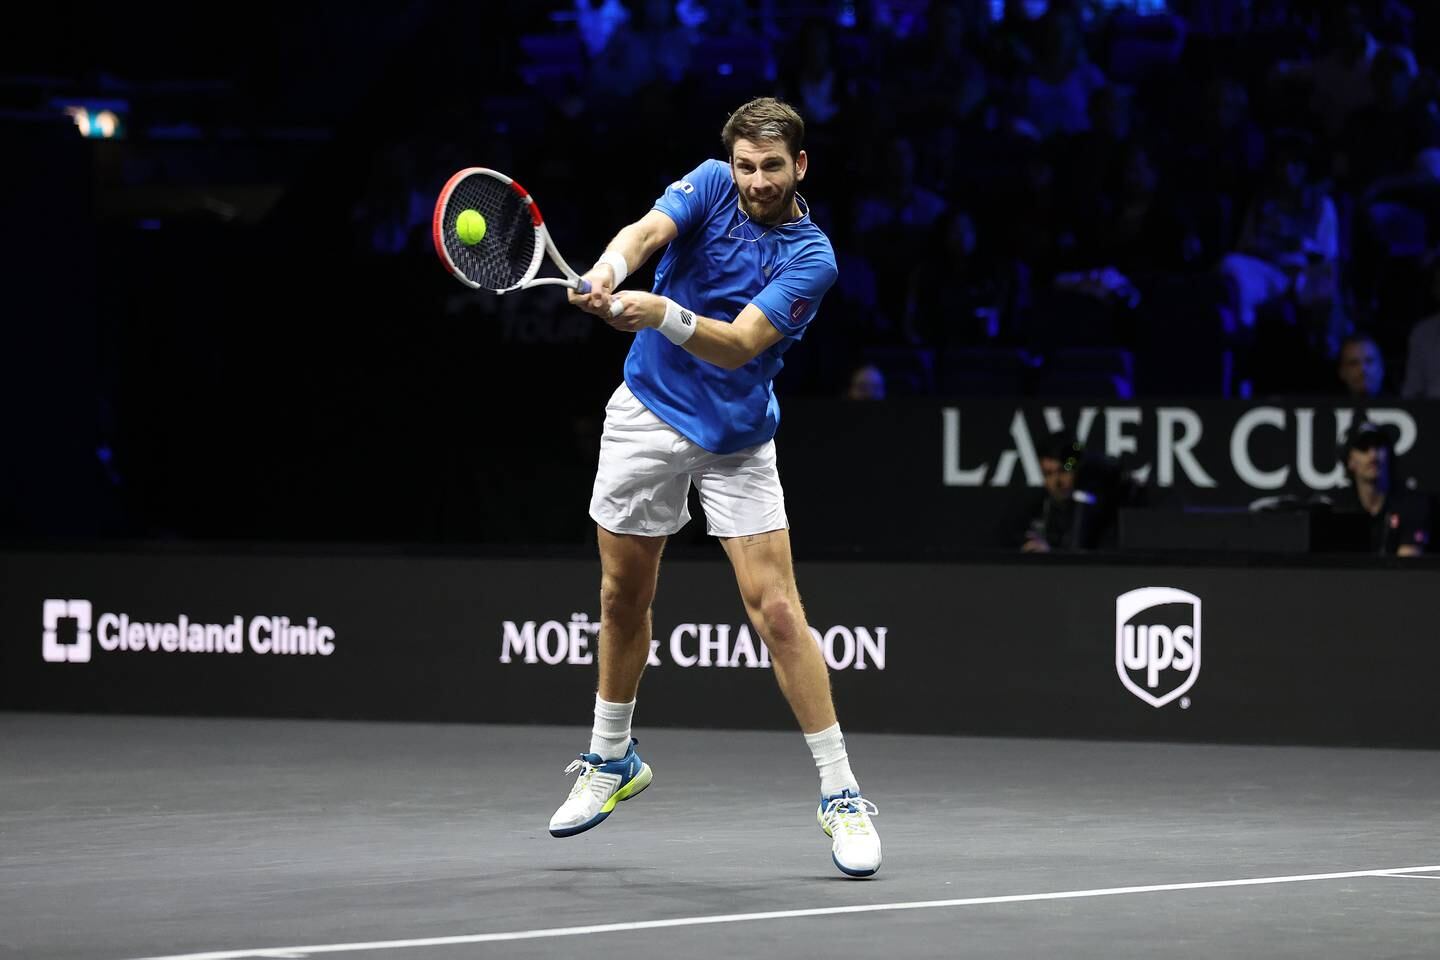 Cameron Norrie was part of Team Europe at the Laver Cup in September, where Roger Federer competed for the final time. Getty